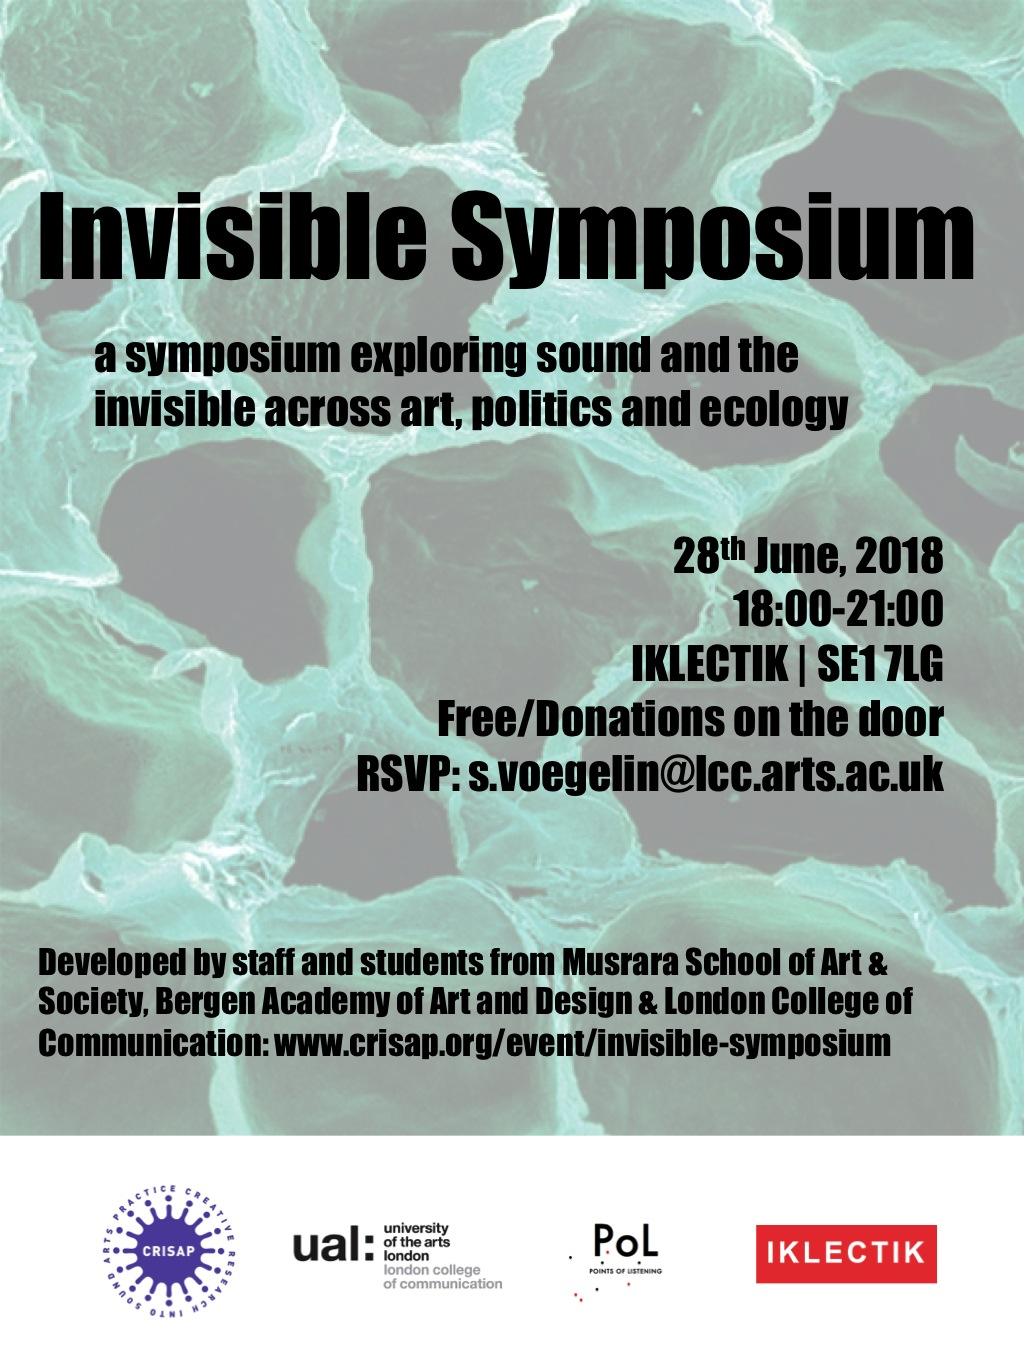 poster for "Invisible Symposium" with some text about the event